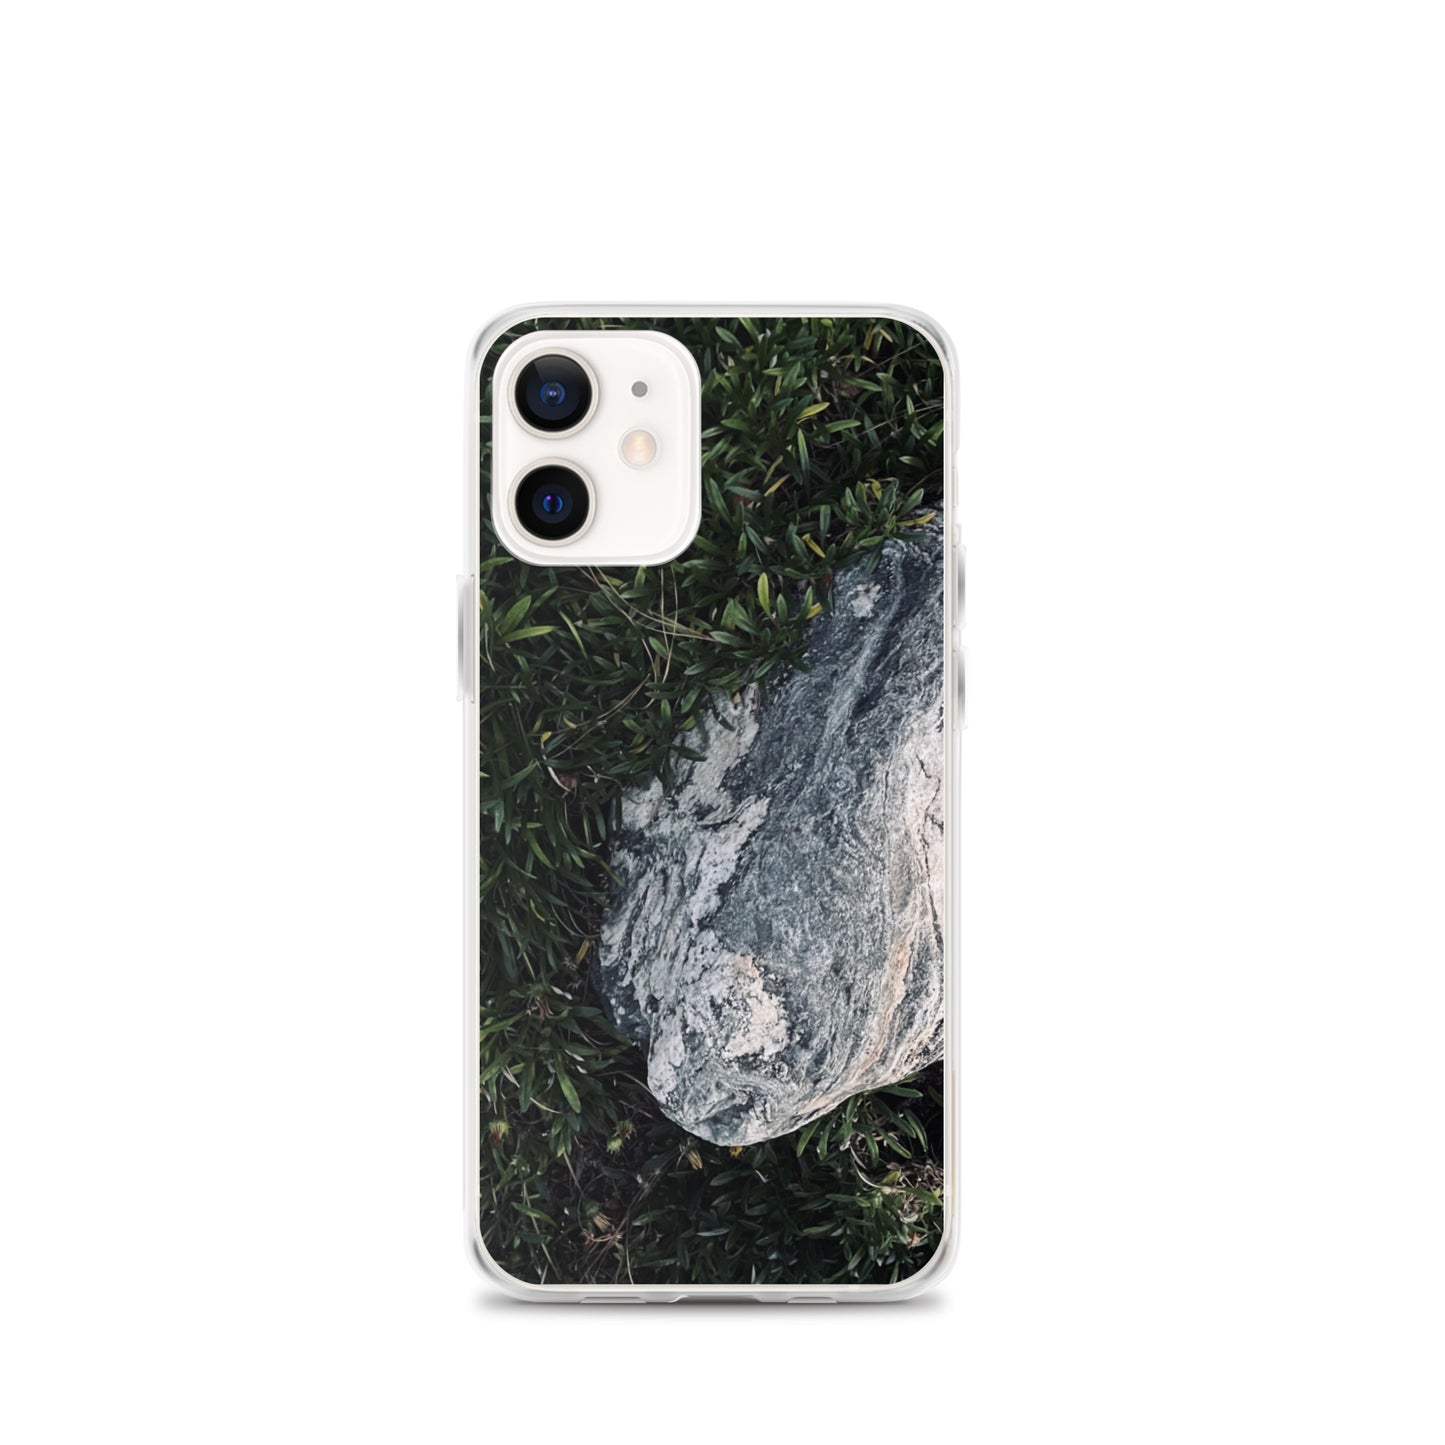 Between a Rock and a Soft Place (iPhone Case) - Comfortable Culture - iPhone 12 mini - Mobile Phone Cases - Comfortable Culture